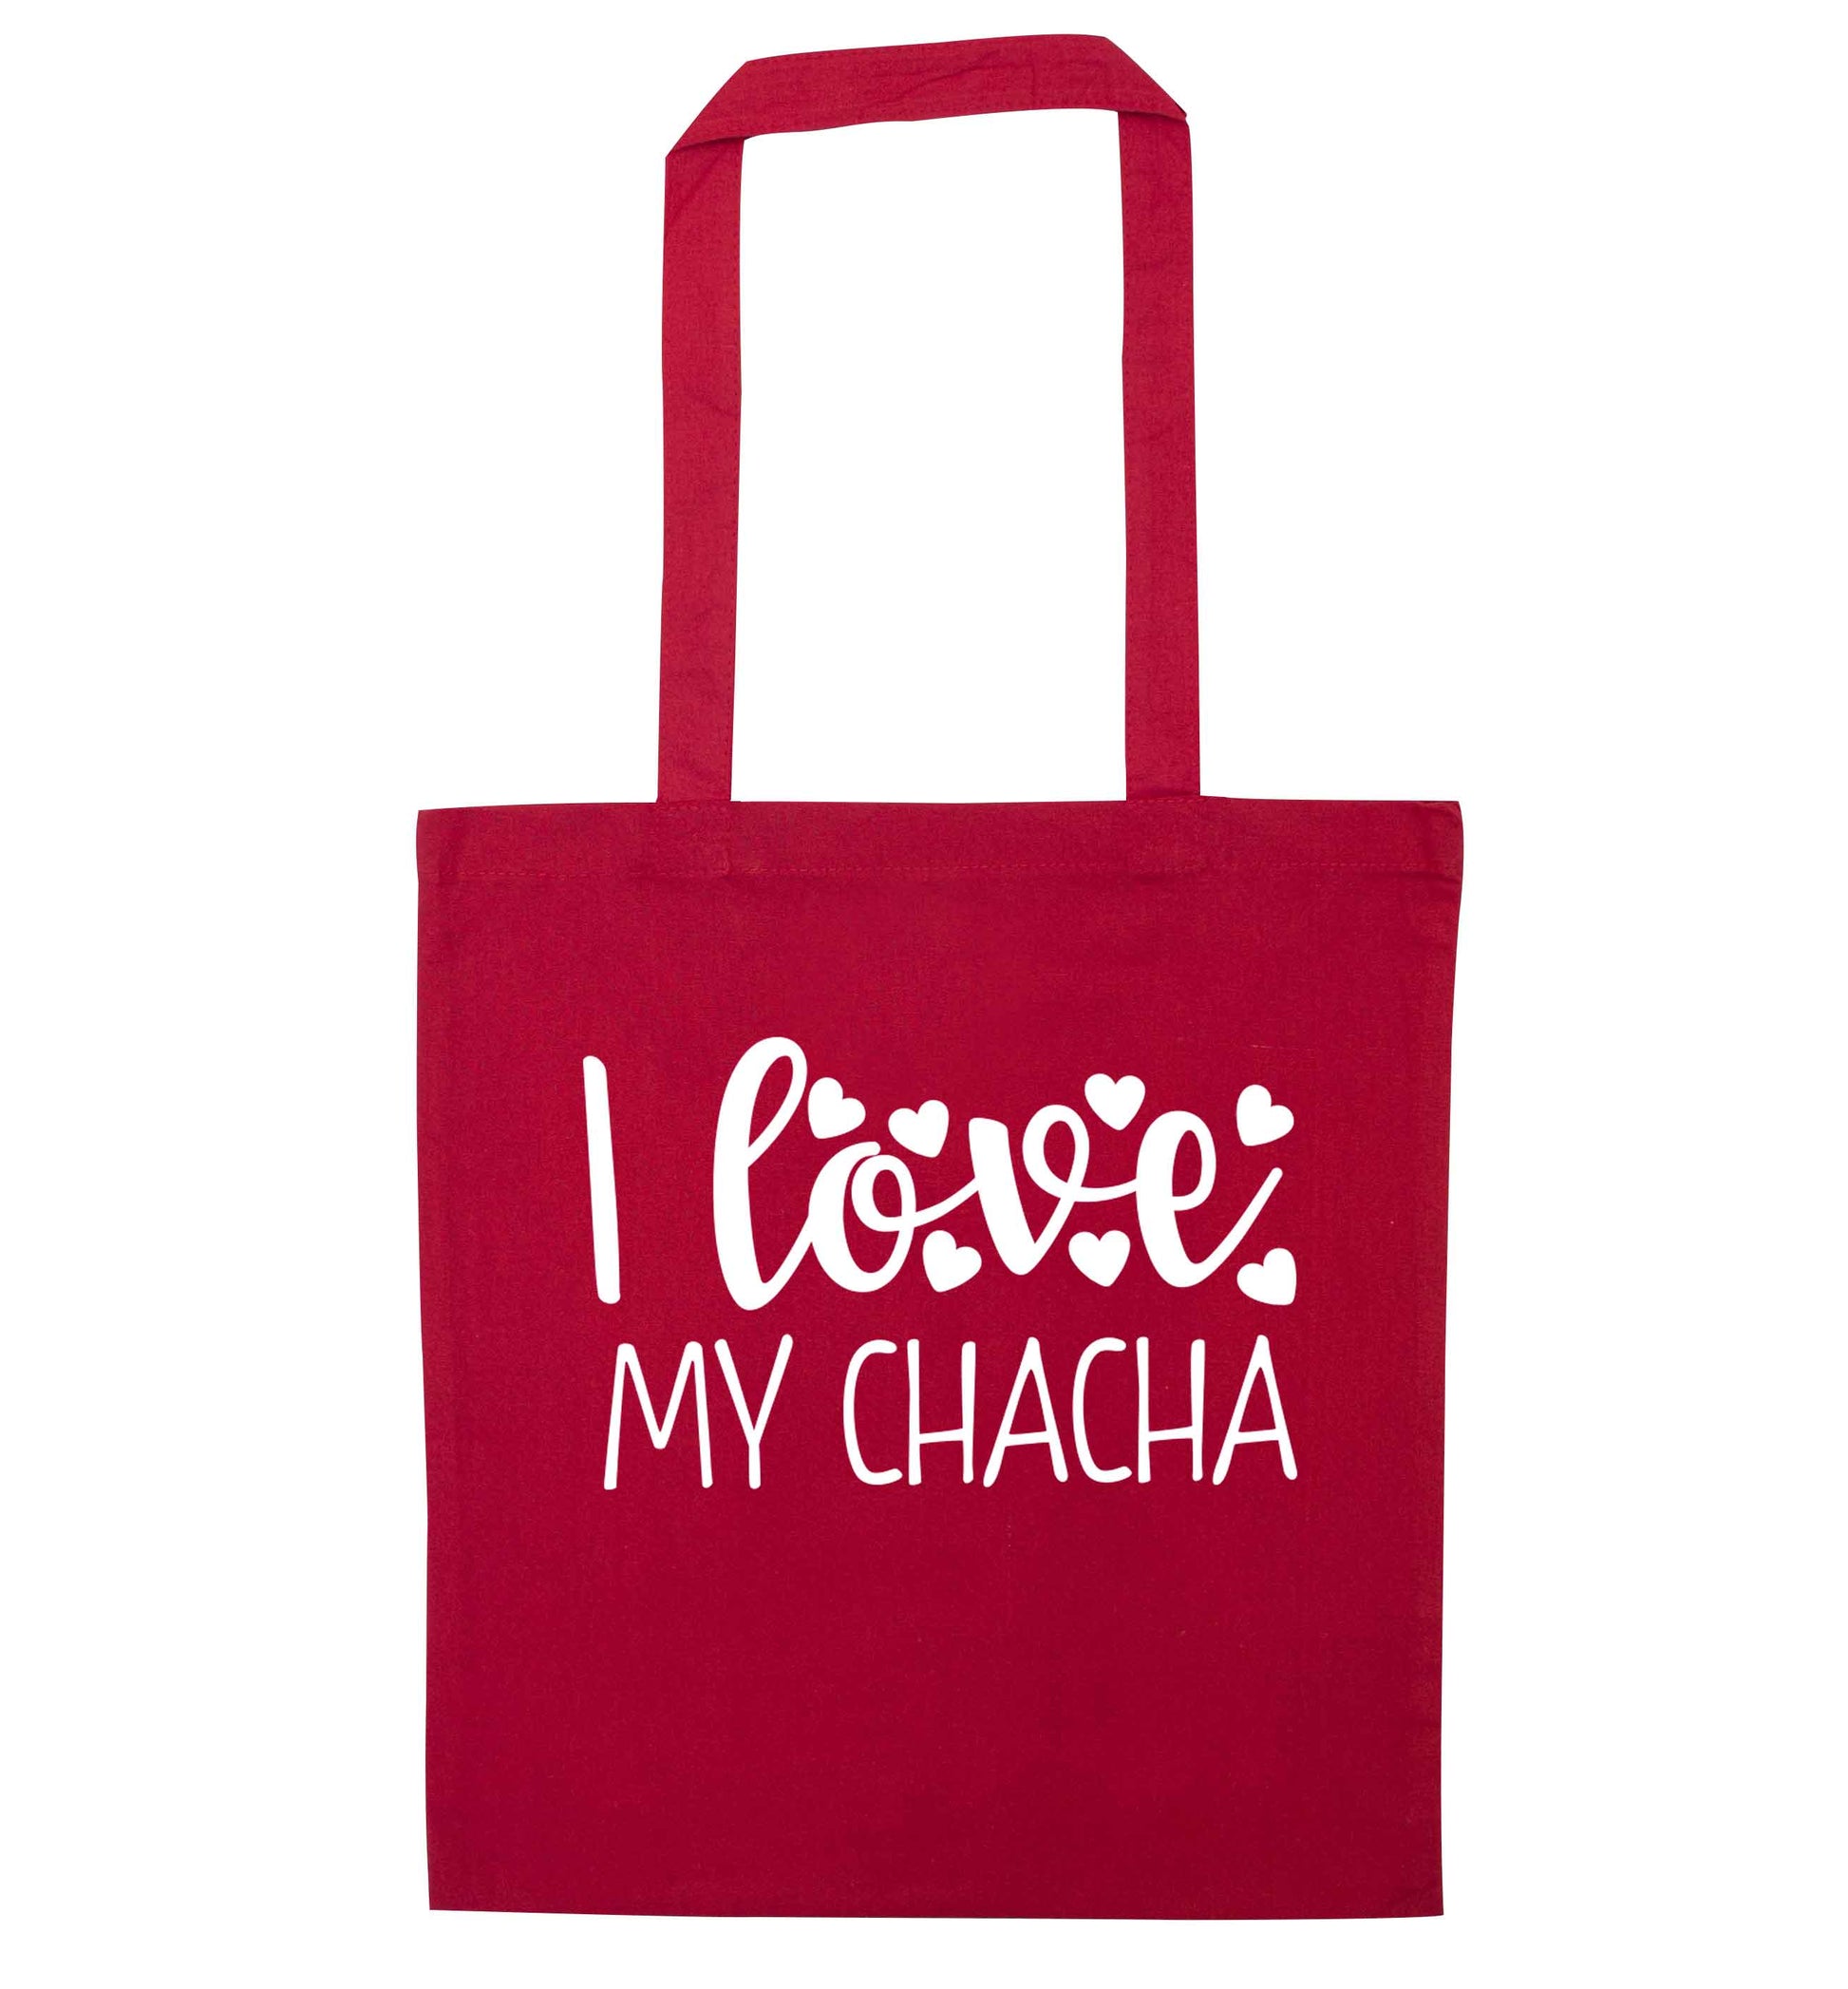 I love my chacha red tote bag